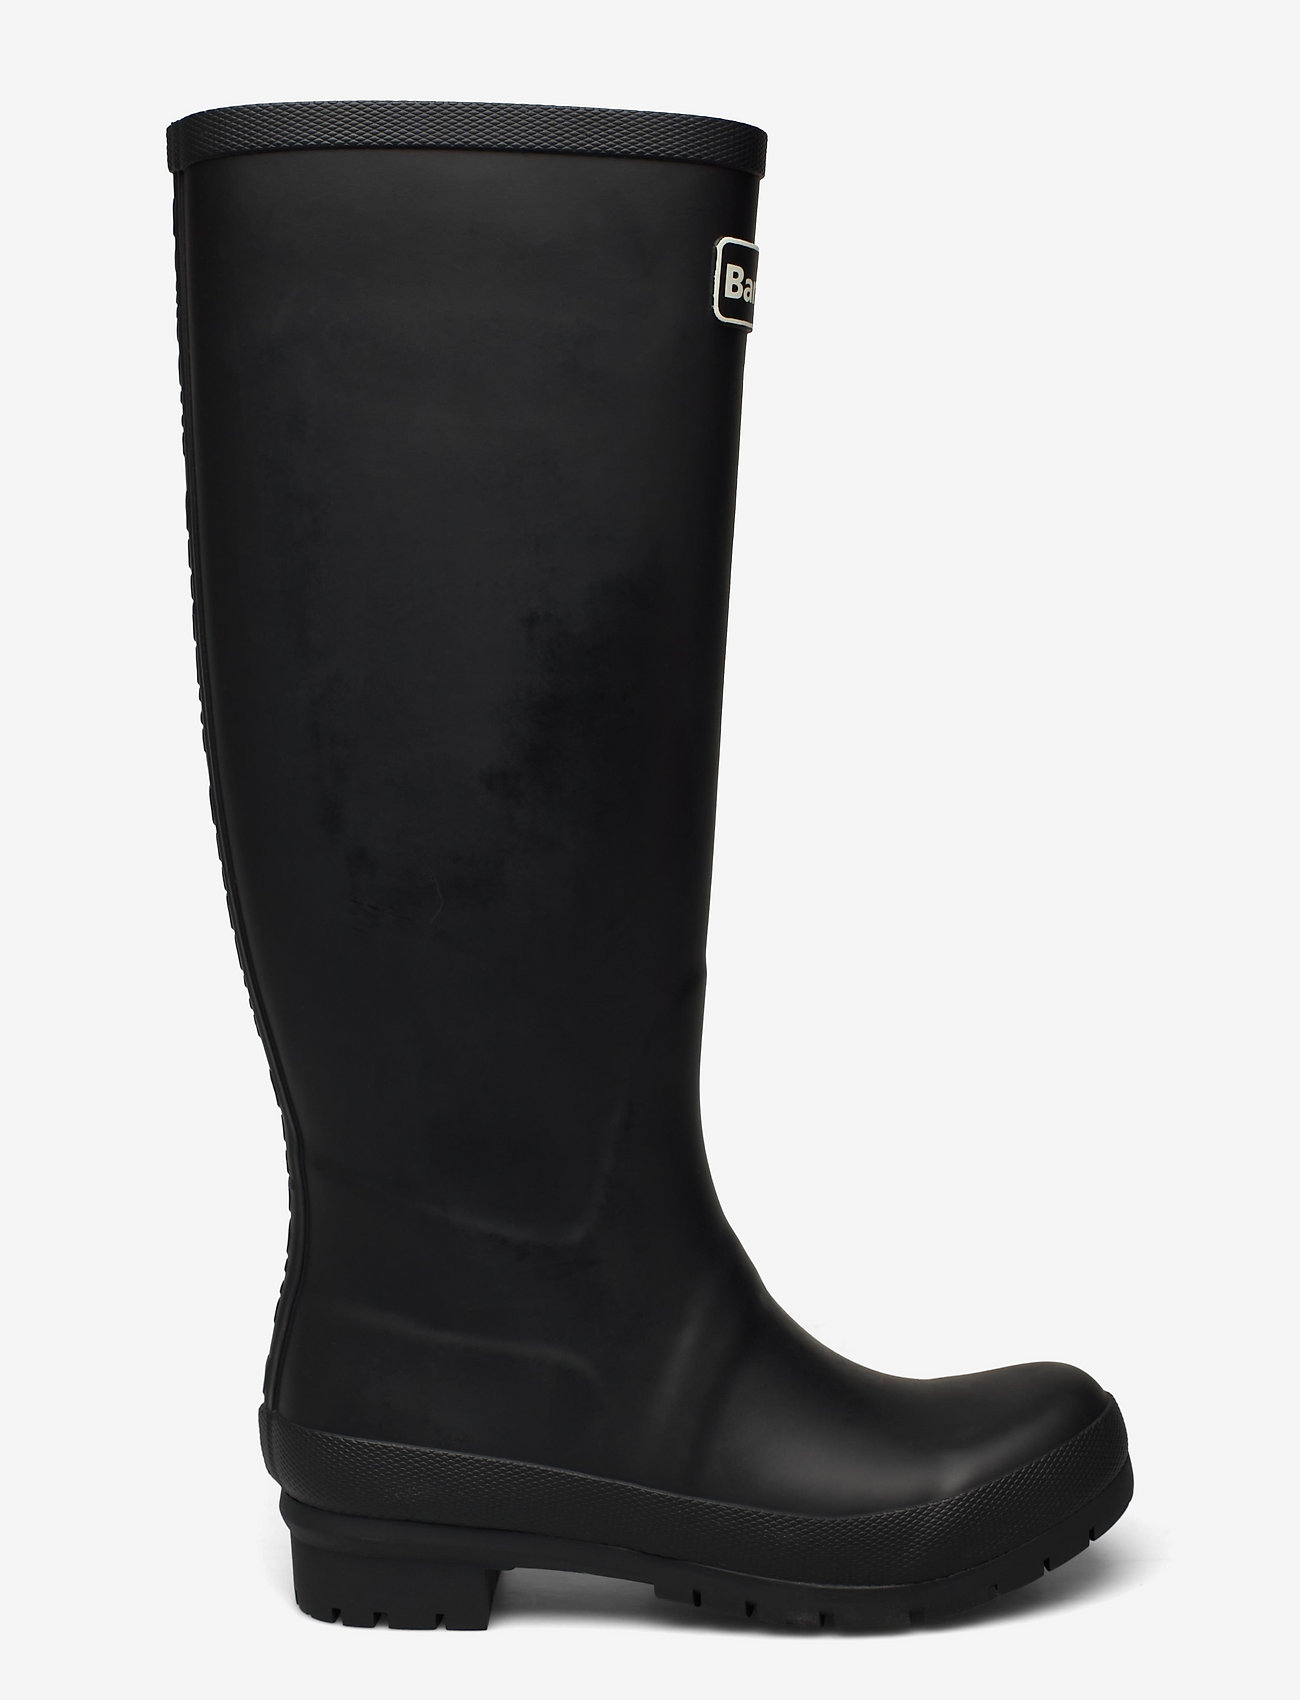 Barbour - Barbour Abbey - knee high boots - black - 1